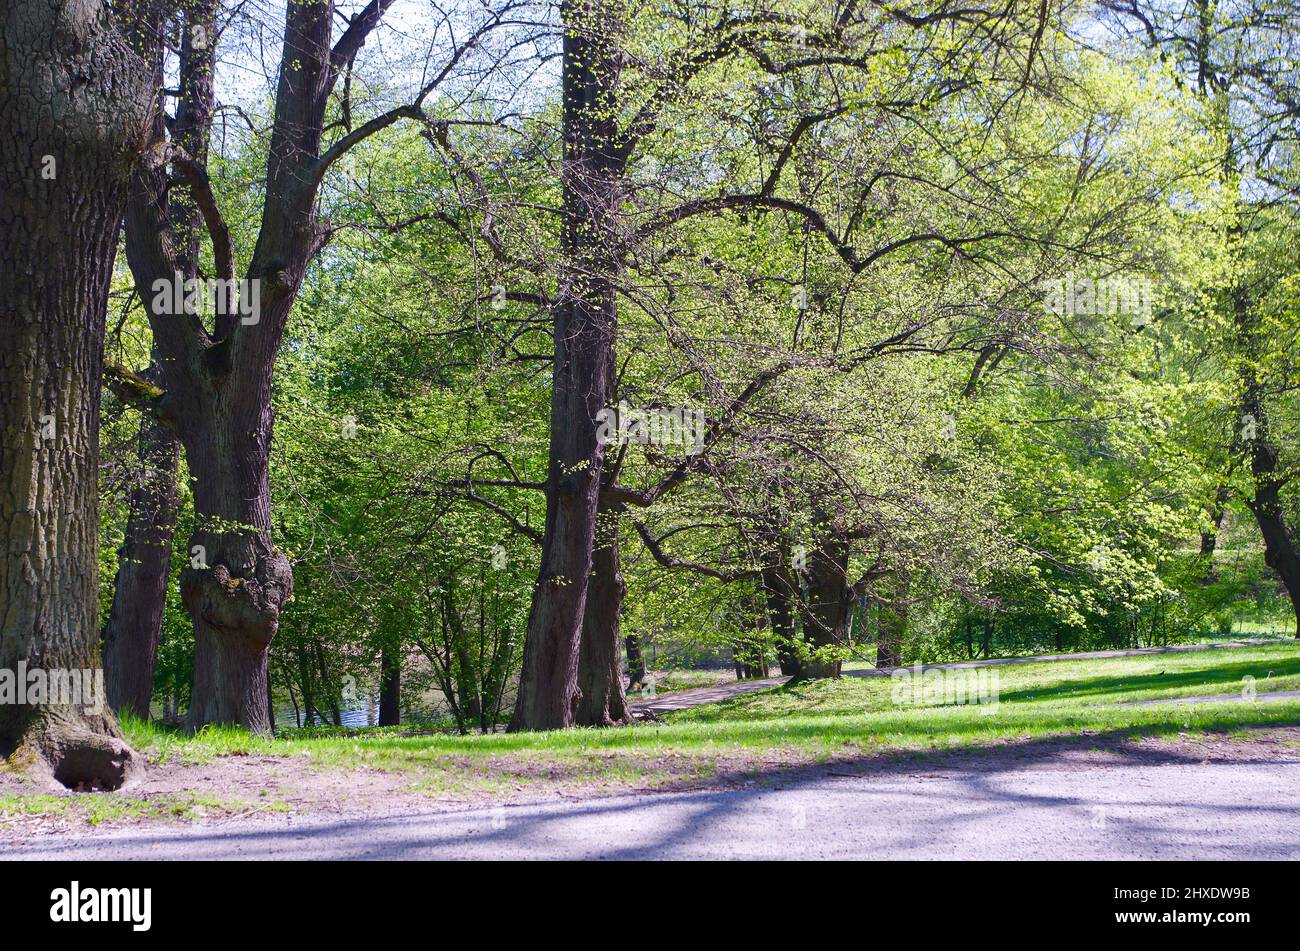 Public park with freshly cut leaves on the trees and a walkway a sunny day in the springtime. Stock Photo